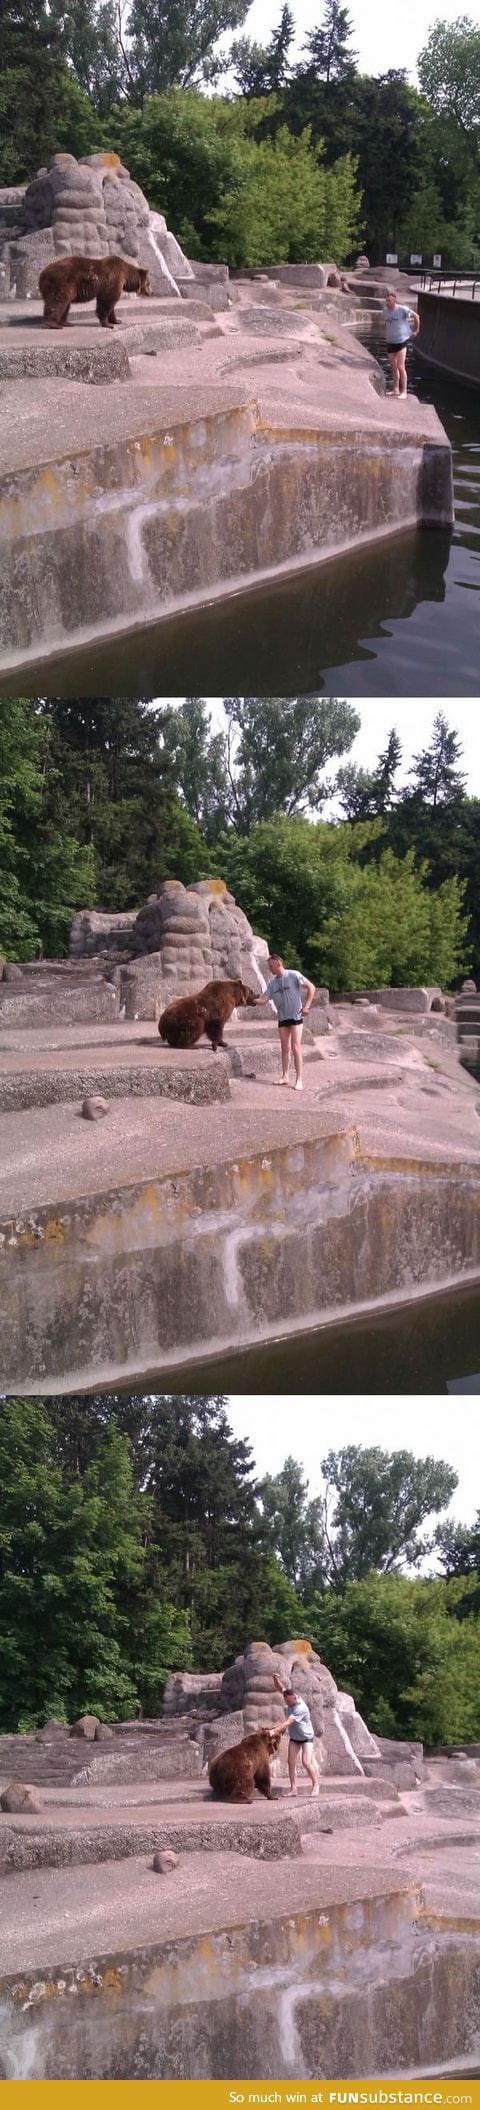 Stoned guy at Warsaw ZOO jumped in to the bear pen to pet the bear